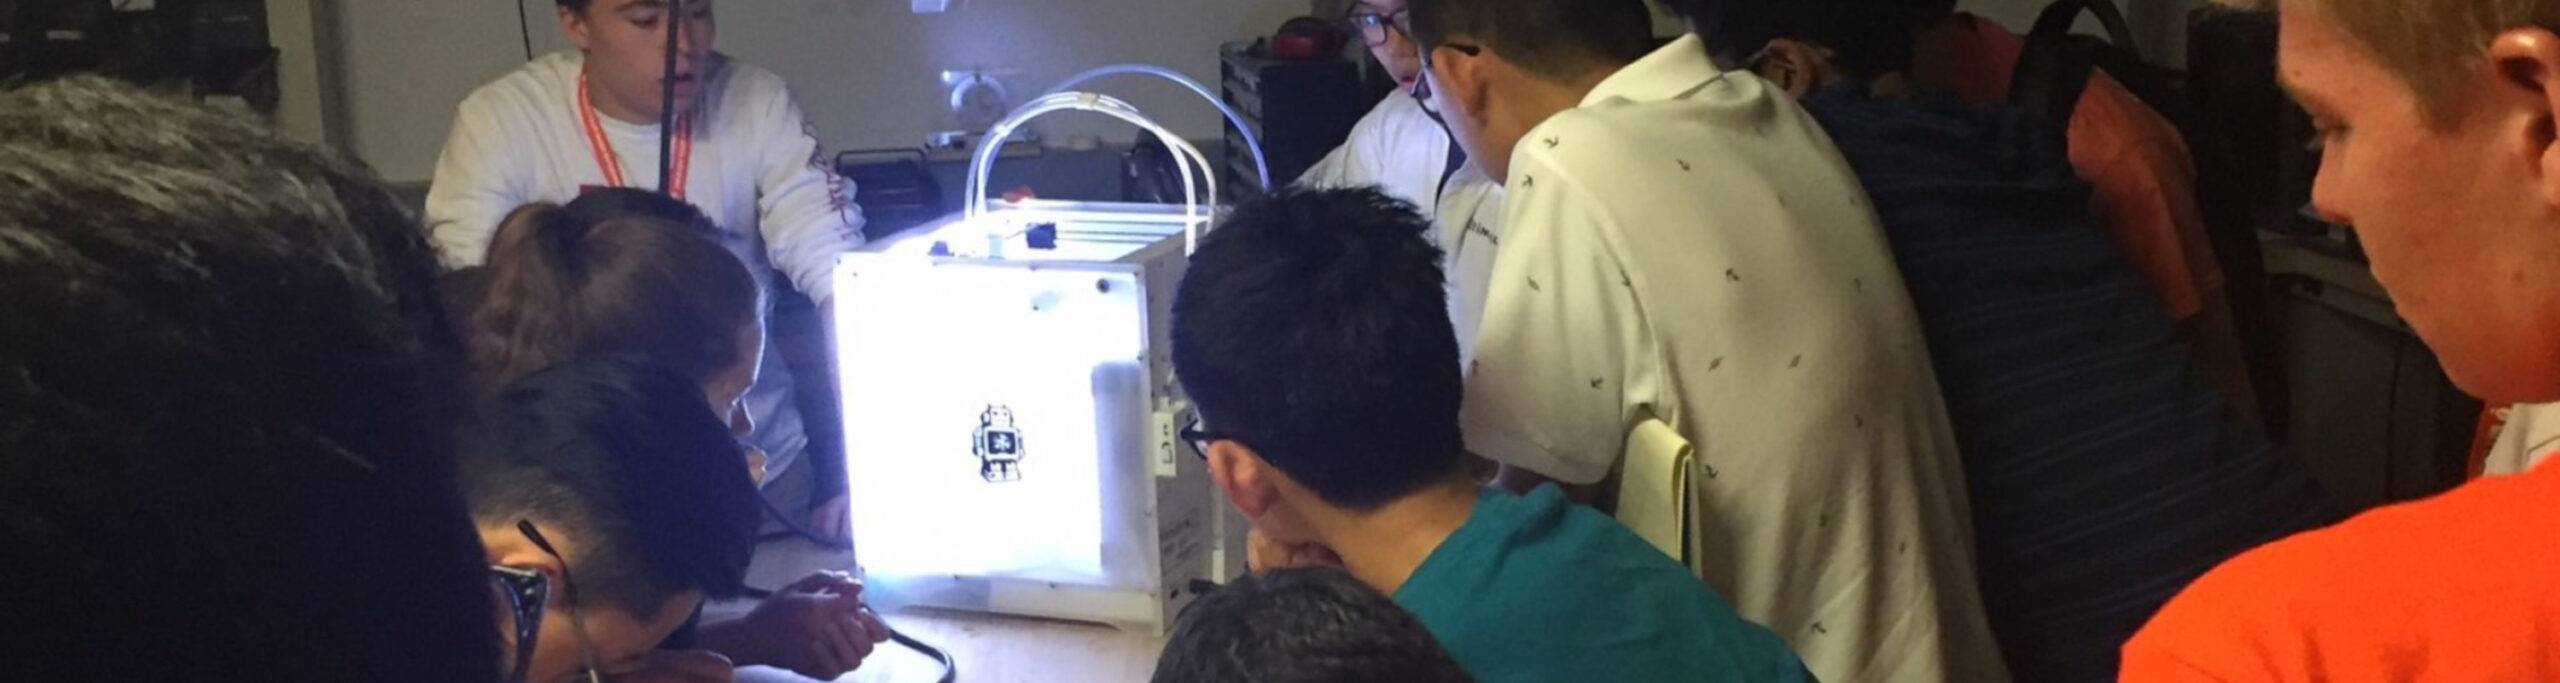 MIT Launch Students using Ultimaker 1